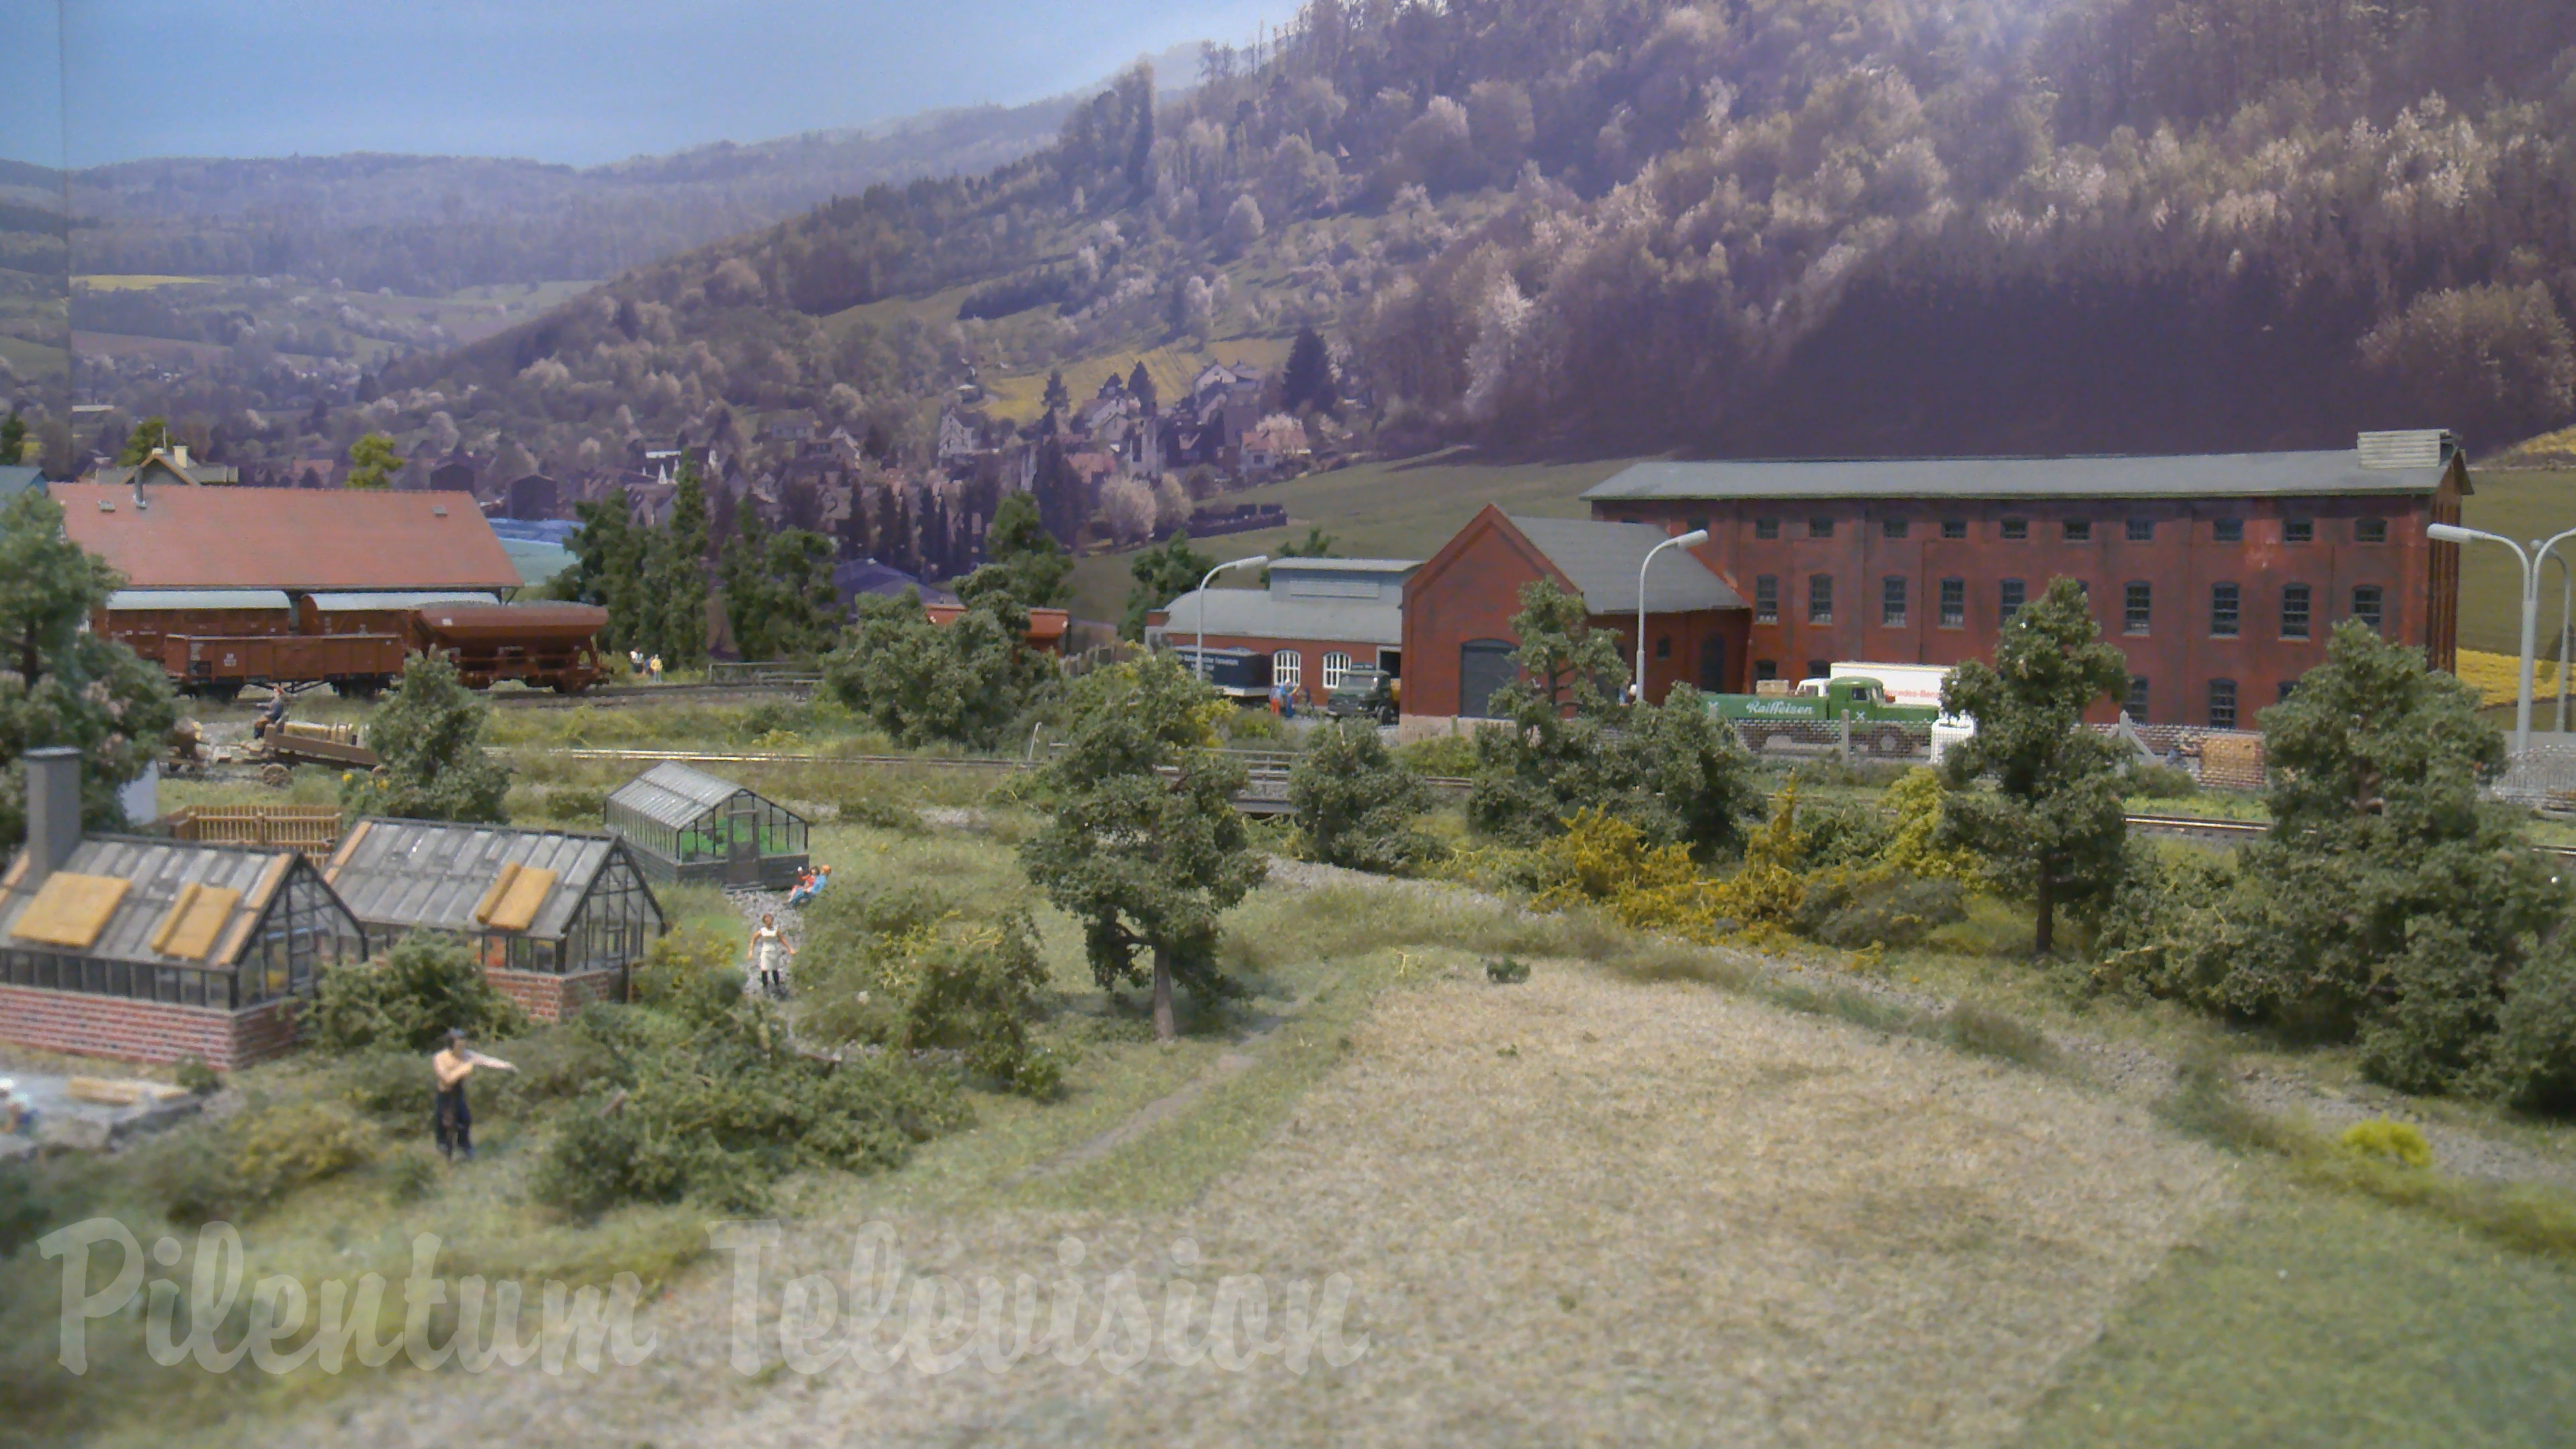 JVC GY-HC 550 4K Camera Test and Review: Video Footage of Model Railways and Model Railroads